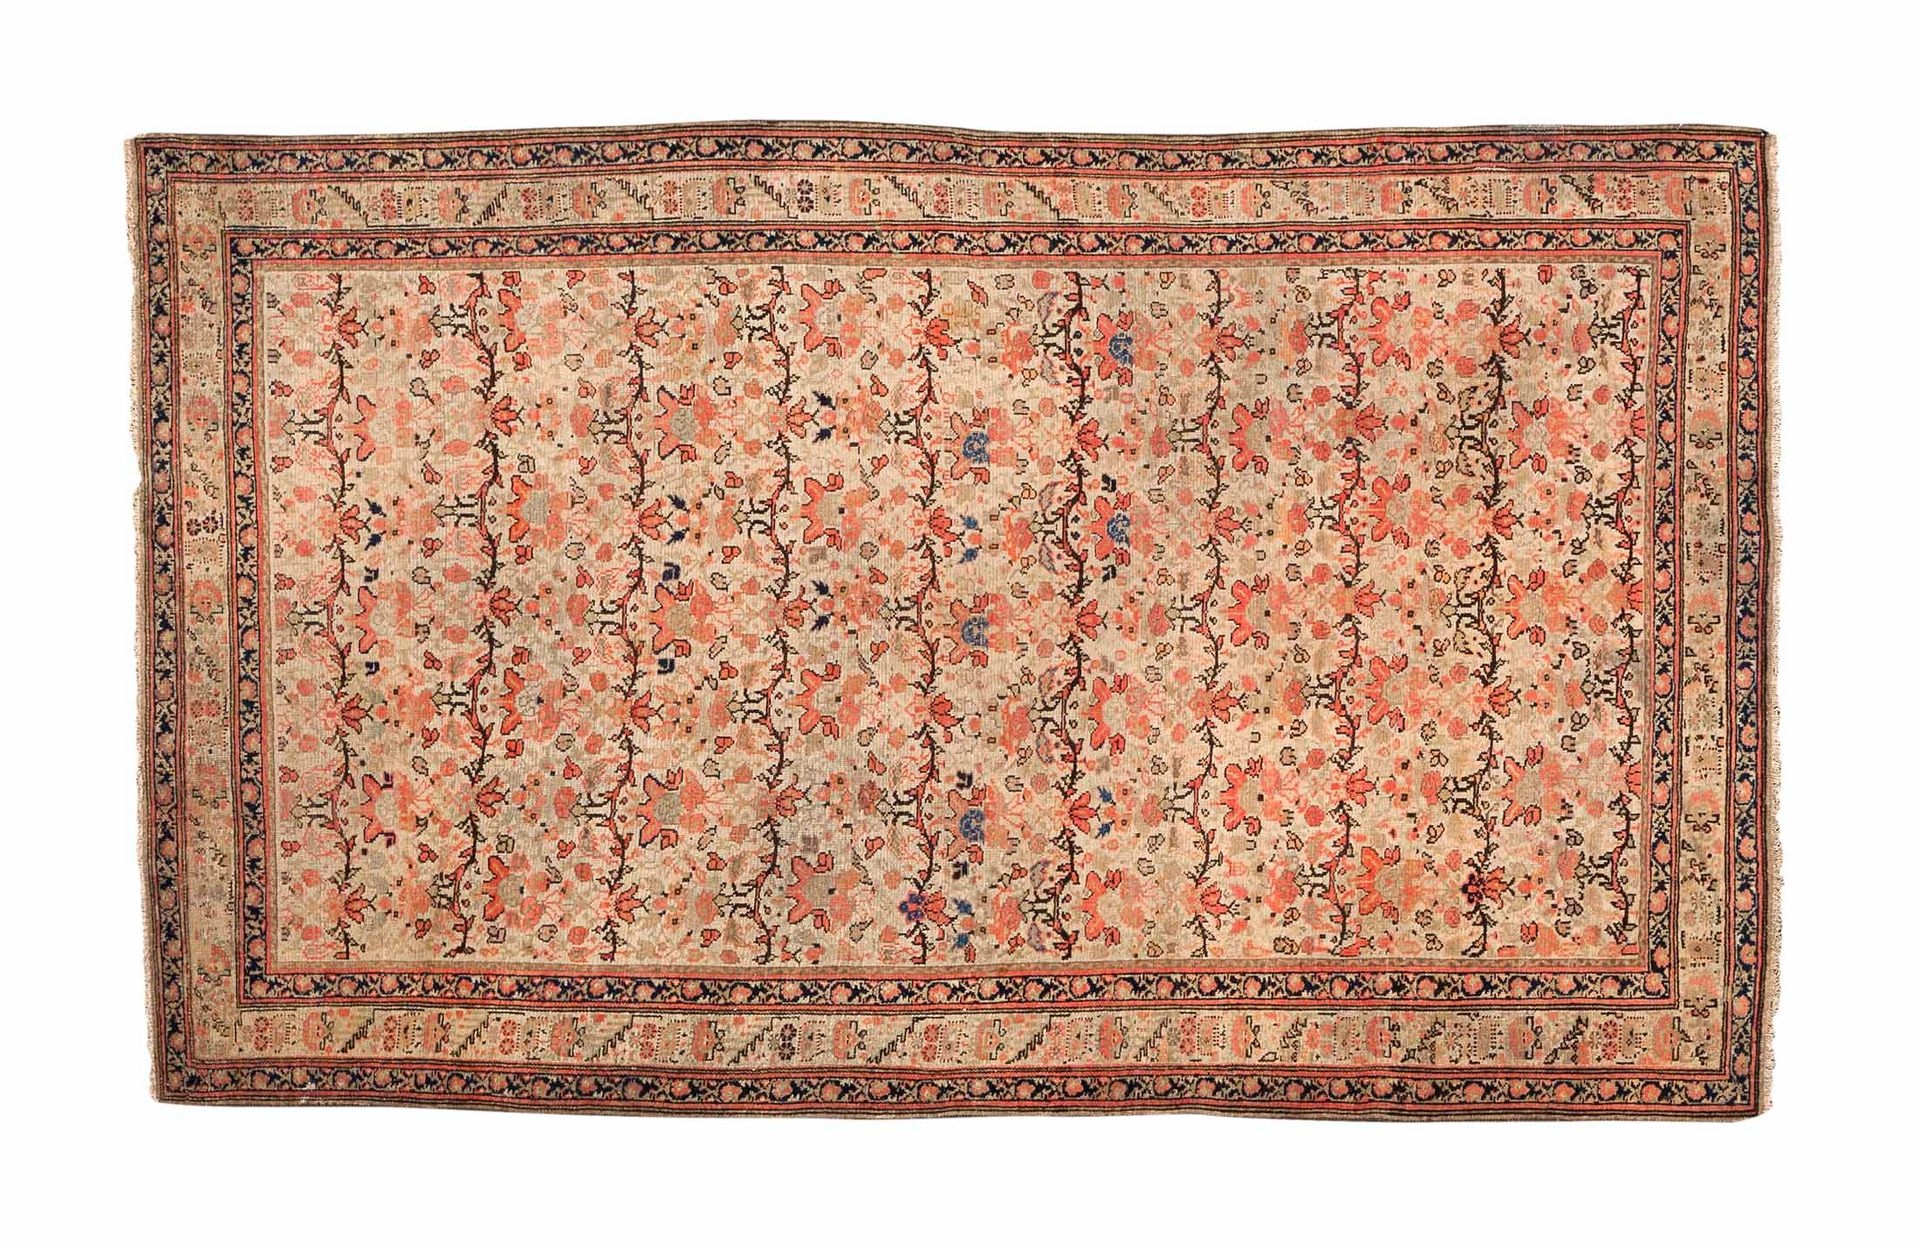 Null Fine MELAYER carpet (Persia), end of the 19th century

Design called "Zili &hellip;